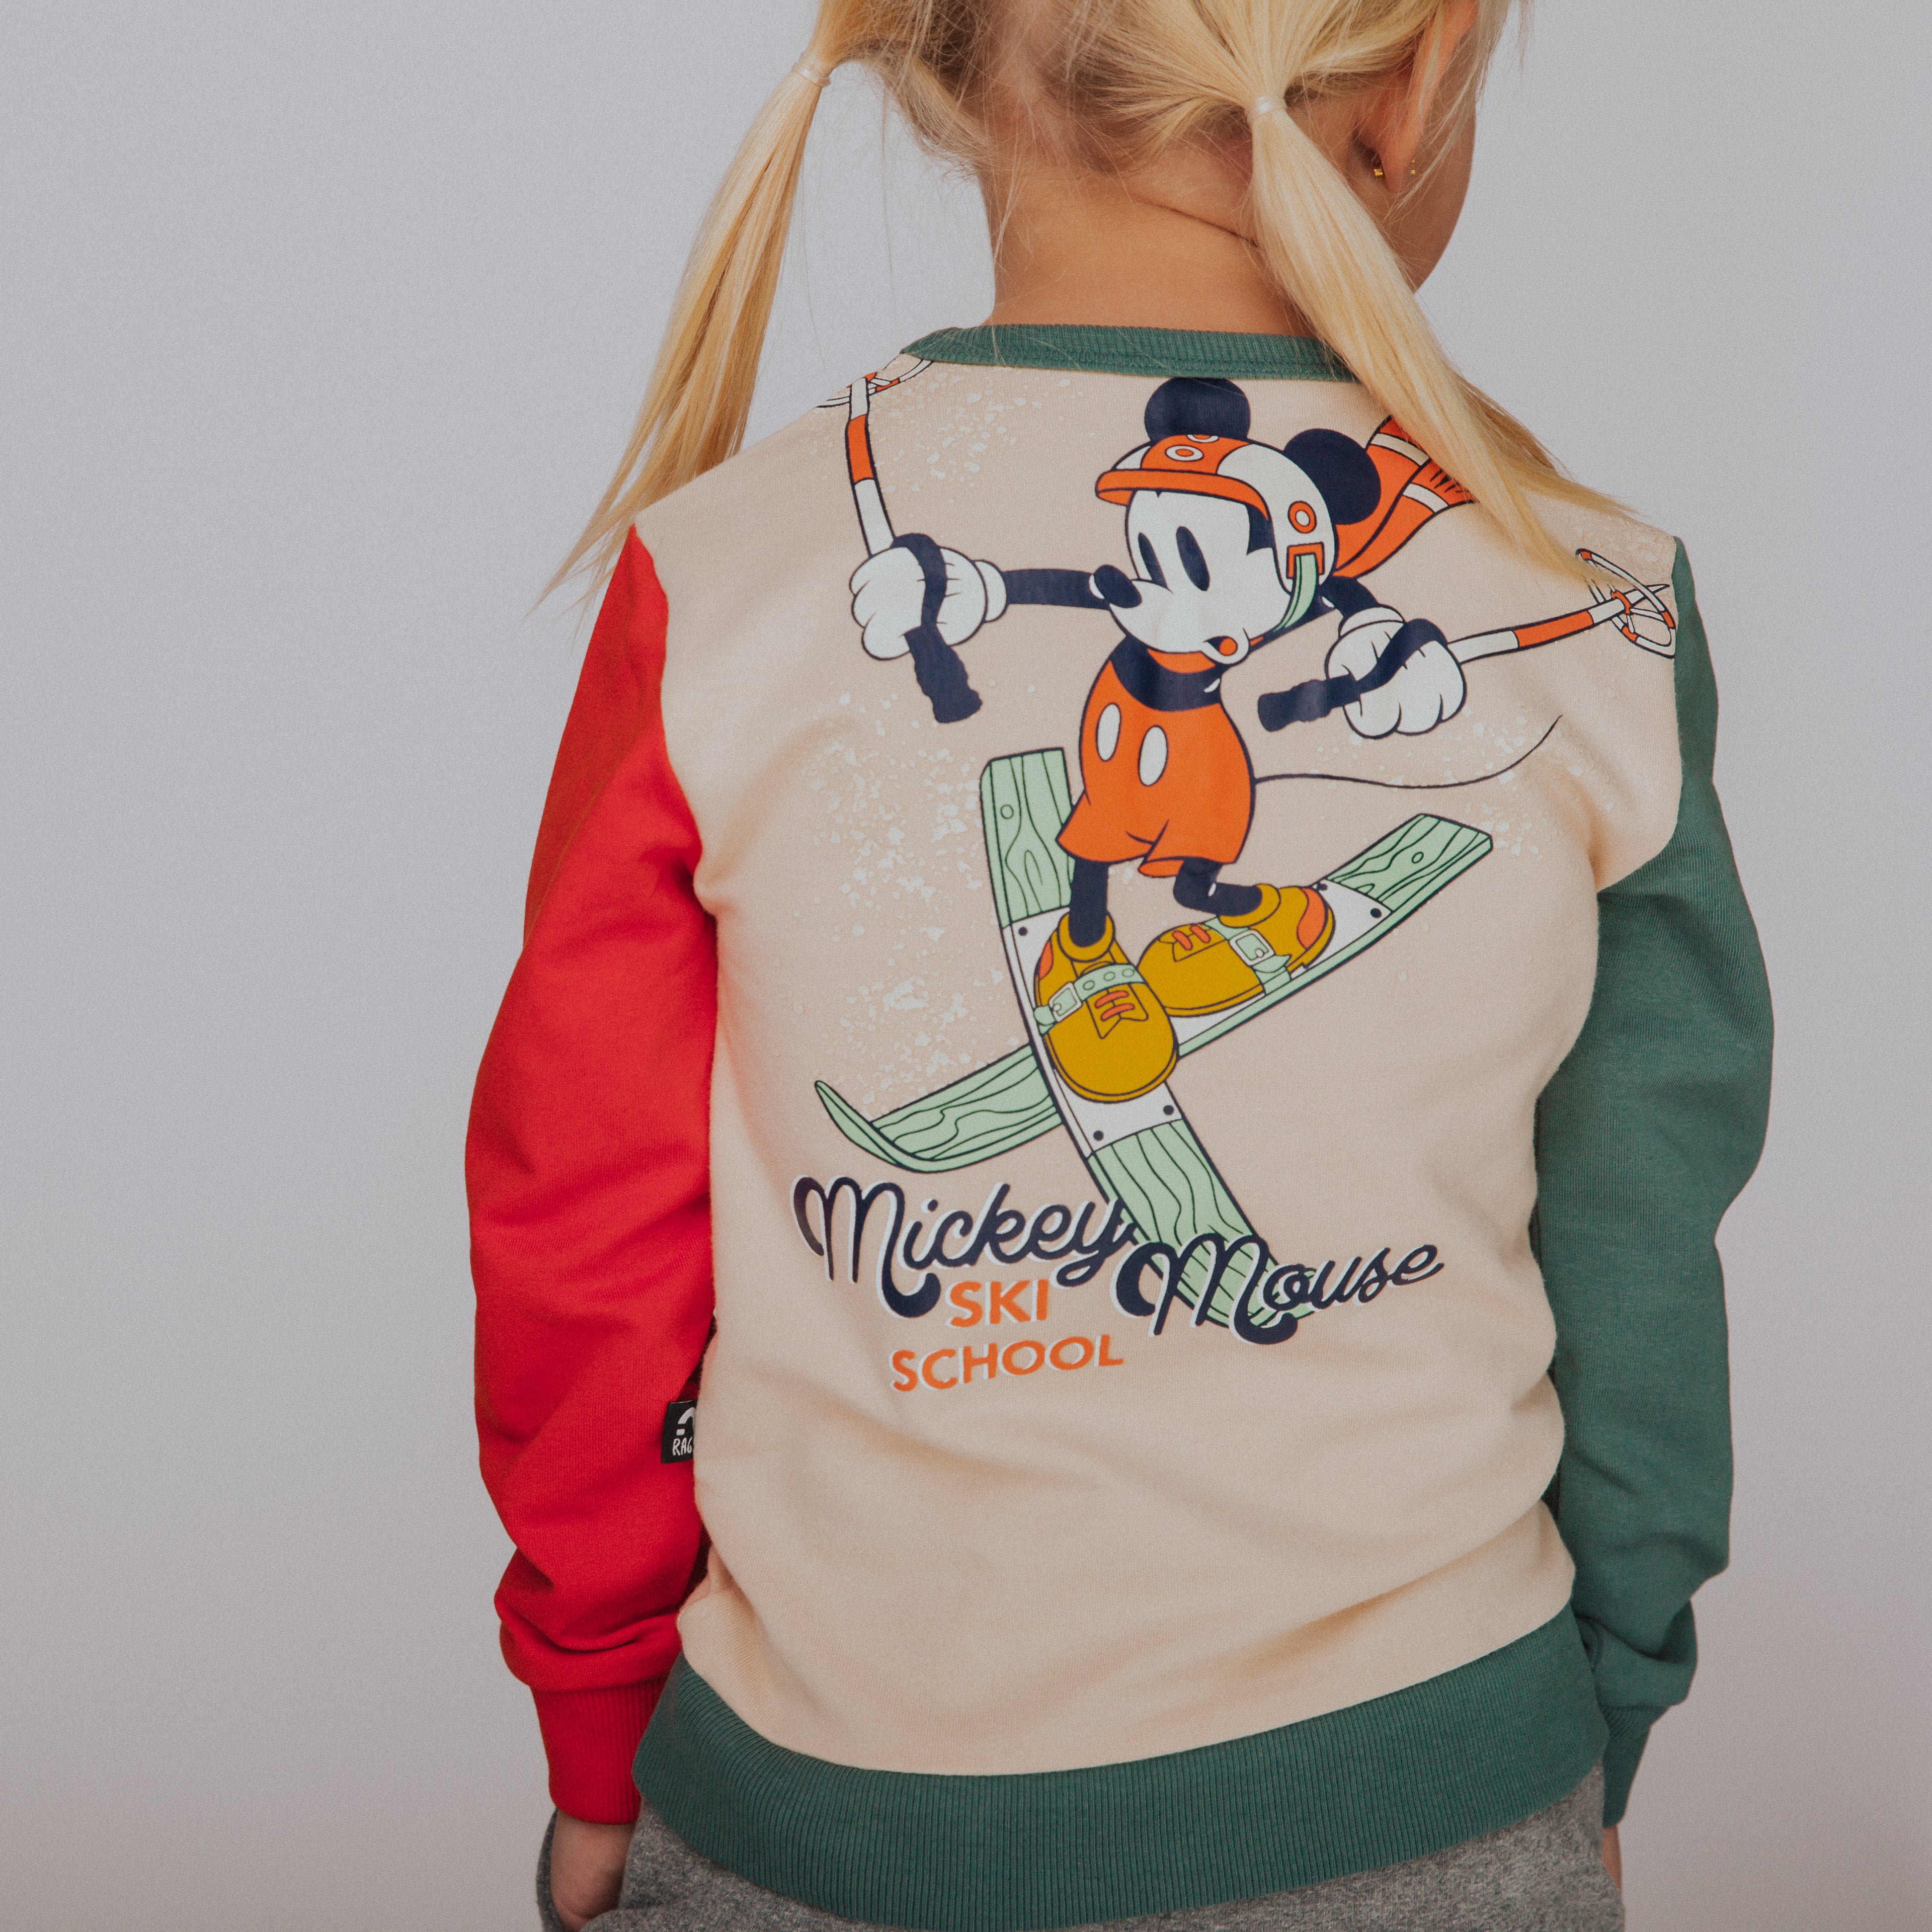 Kids Sweatshirt - 'Skiing Mickey Mouse (FINAL SALE)' - Disney Christmas Collection from RAGS